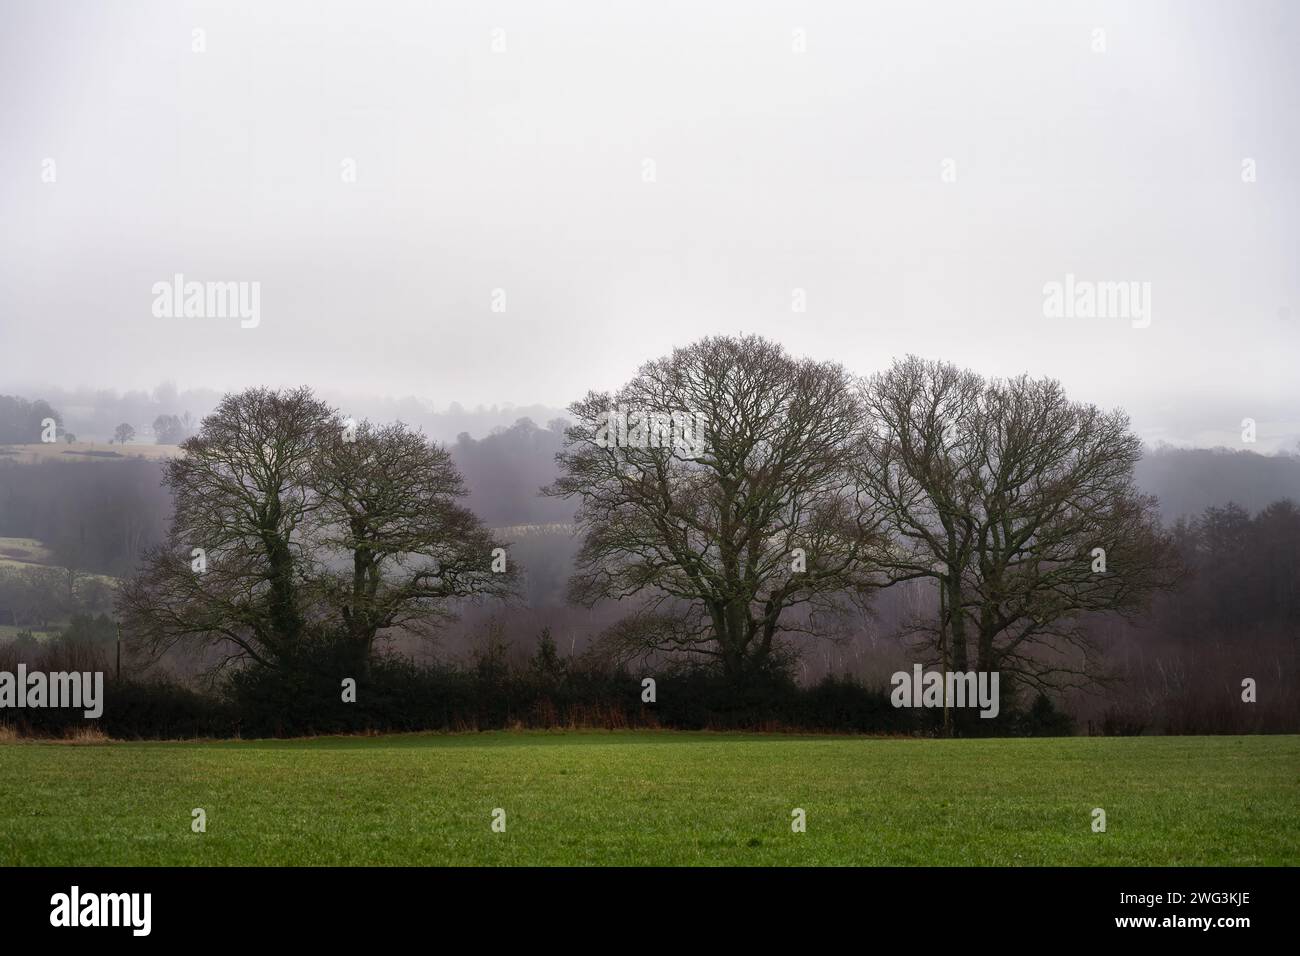 Walking in Wealden, East Sussex, England, on a foggy winter morning. Three leafless oaktrees. Stock Photo